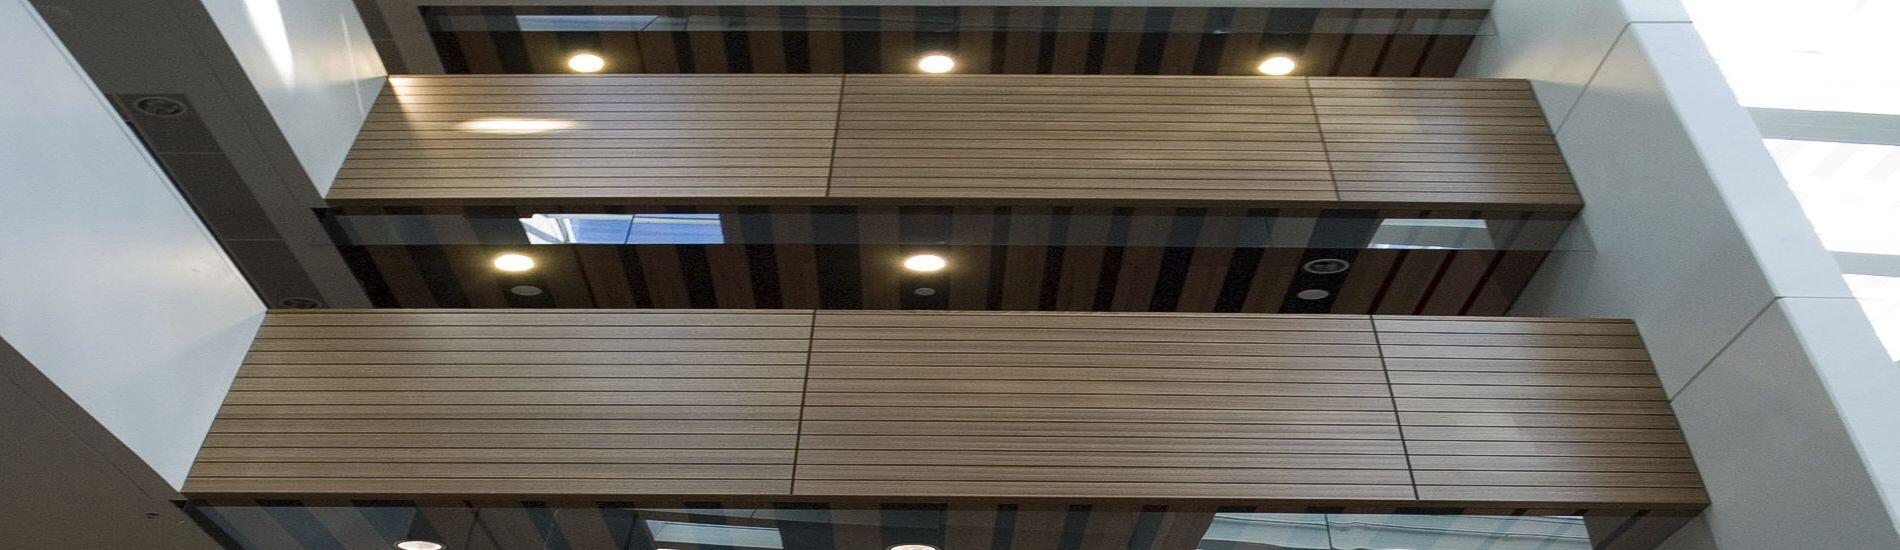 SUPASLAT decorative panels on ceilings, walls and balustrades of building atrium